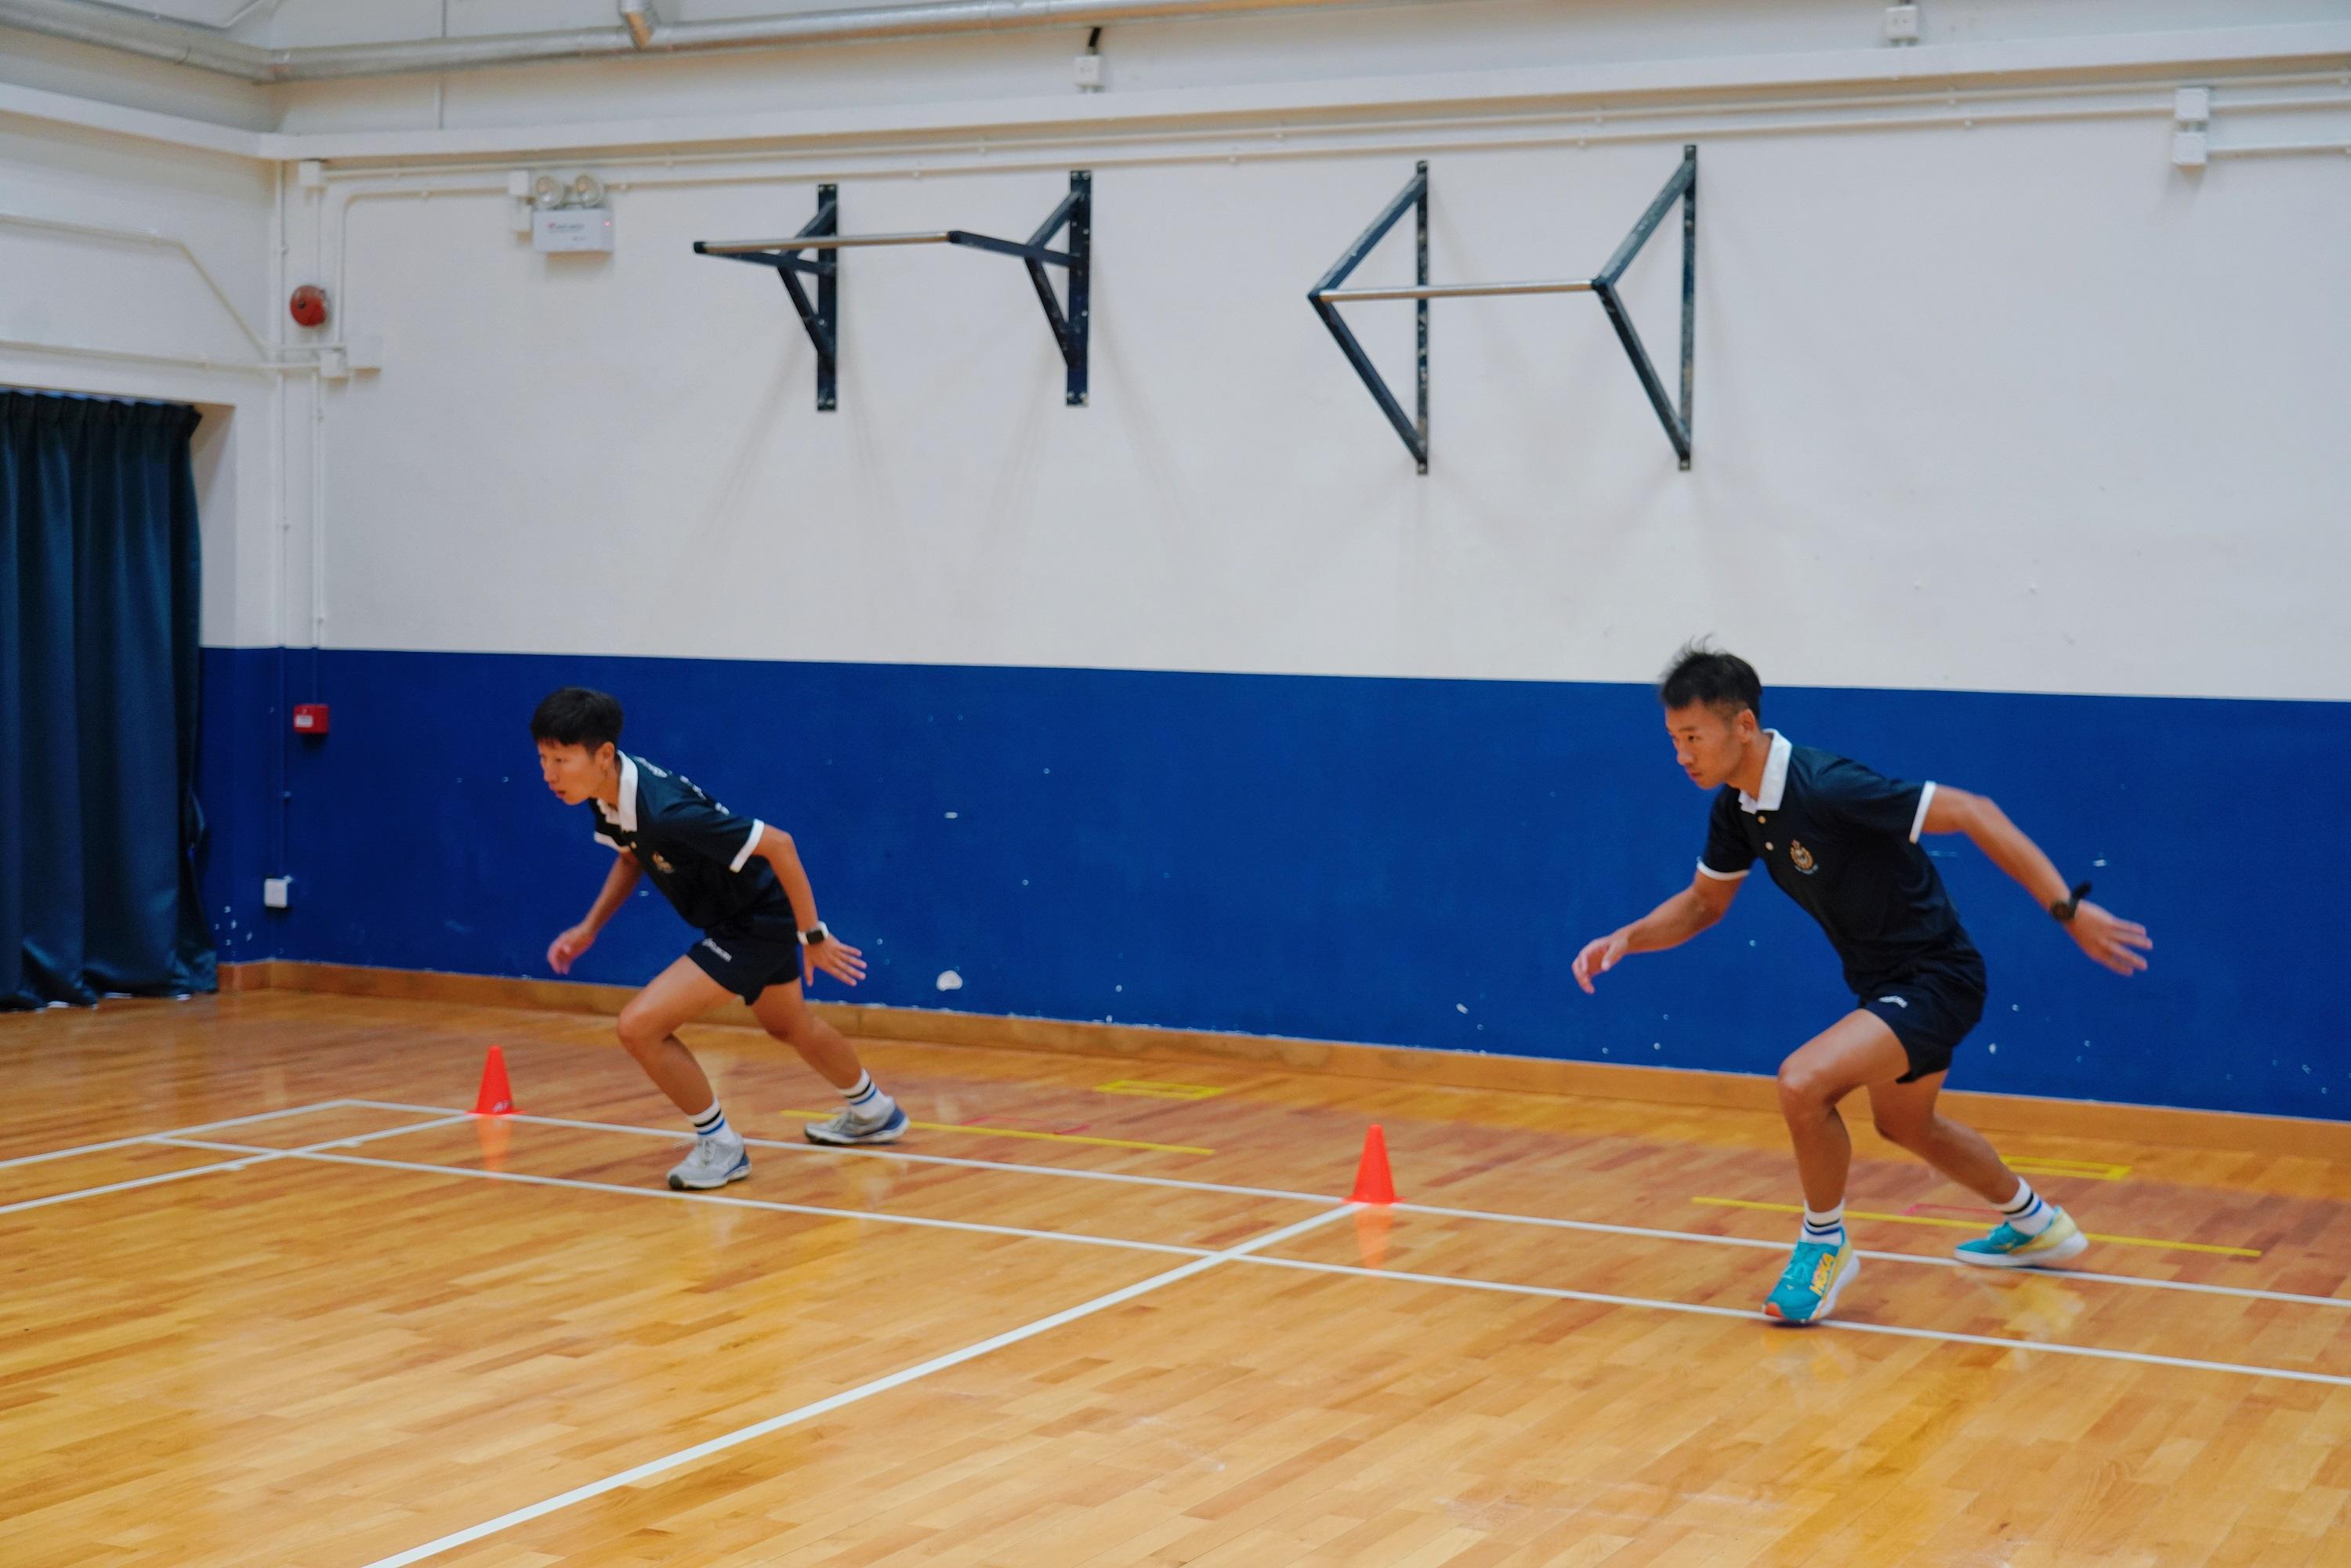 The Hong Kong Police Force announced today (September 8) the revision of Physical Fitness Test for recruitment. Photo shows police officers demonstrating the modified 4x10m shuttle run, which using feet instead of hands to touch the line mark when turning around.
